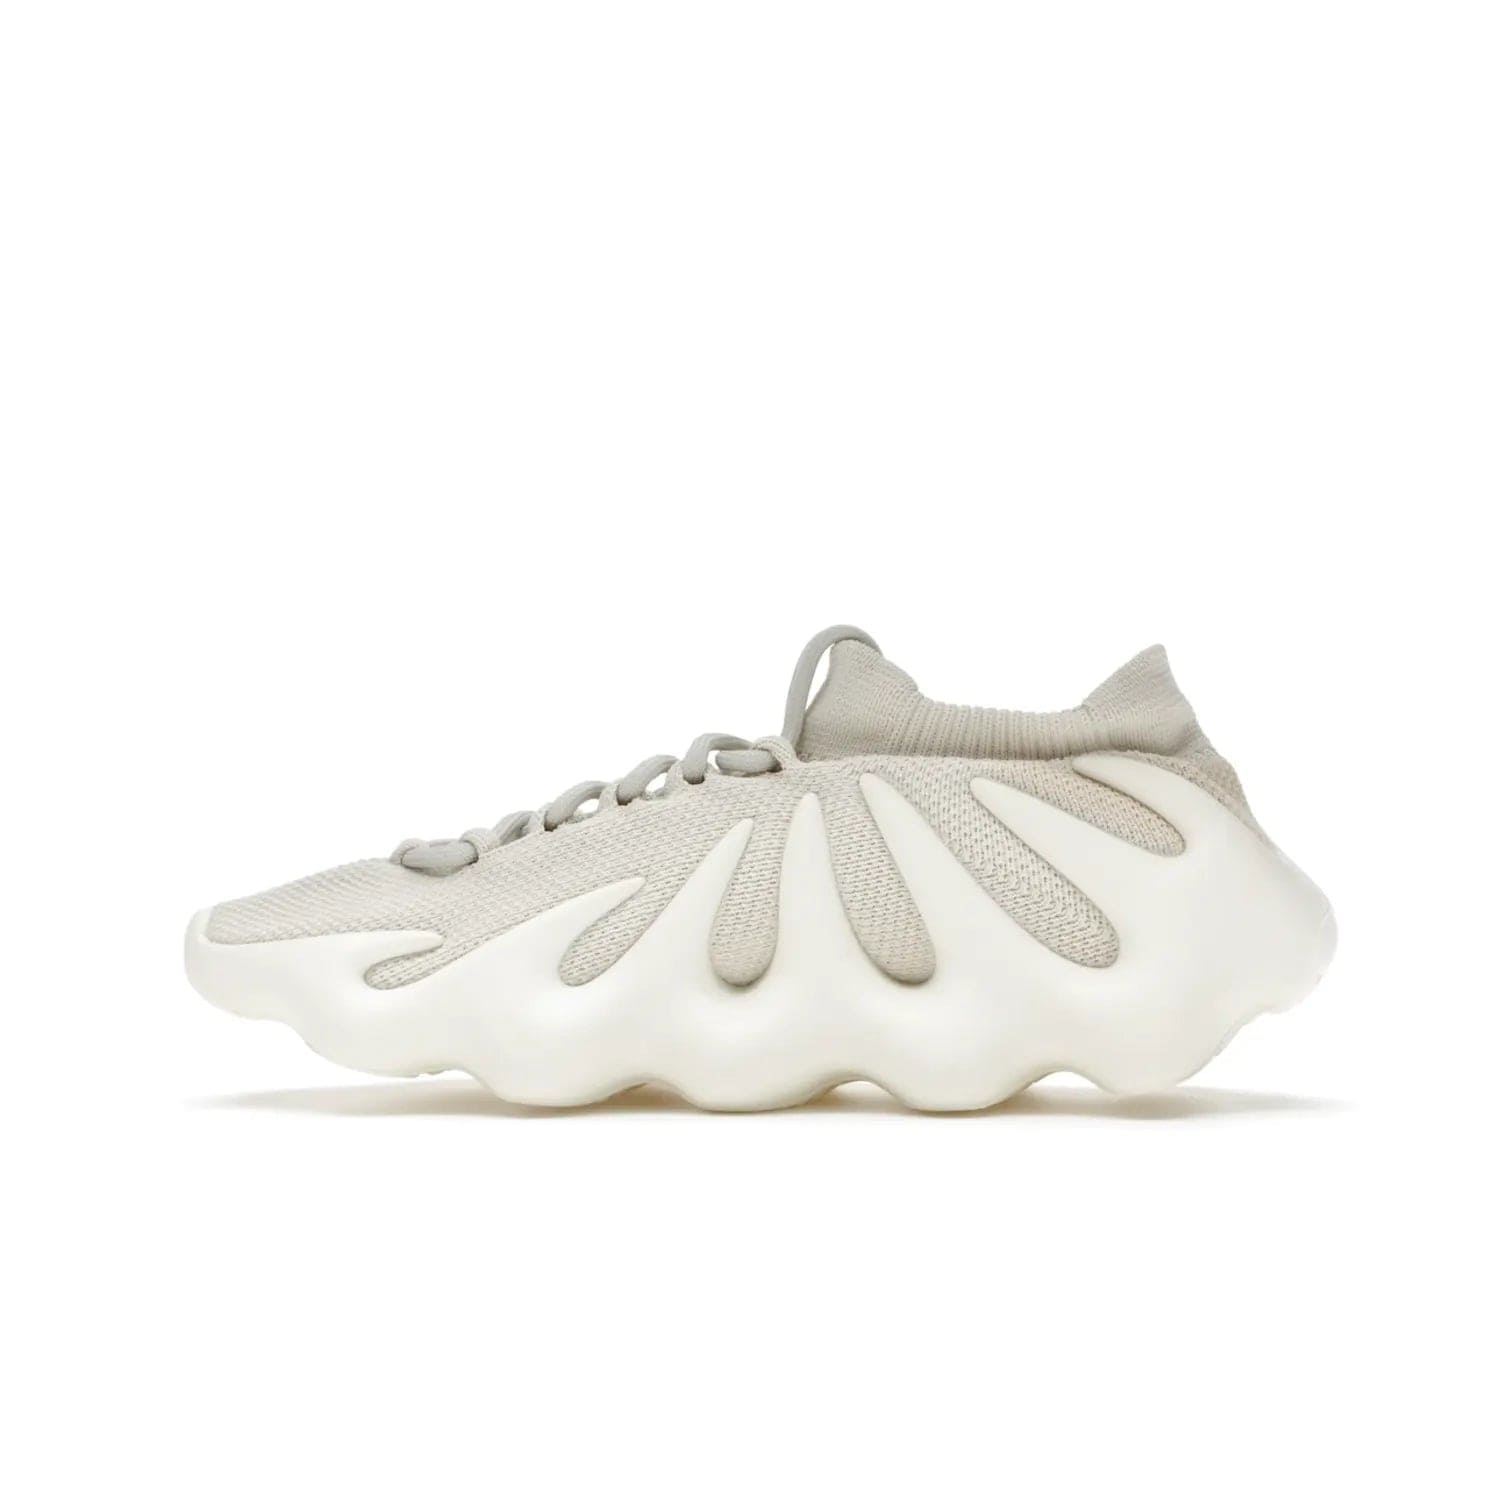 adidas Yeezy 450 Cloud White - Image 20 - Only at www.BallersClubKickz.com - Experience the future with the adidas Yeezy 450 Cloud White. A two-piece design featuring an extreme foam sole and mesh upper, this silhouette is expected to release in March 2021. Get your hands on this striking Cloud White/Cloud White colorway and stand out in the crowd.